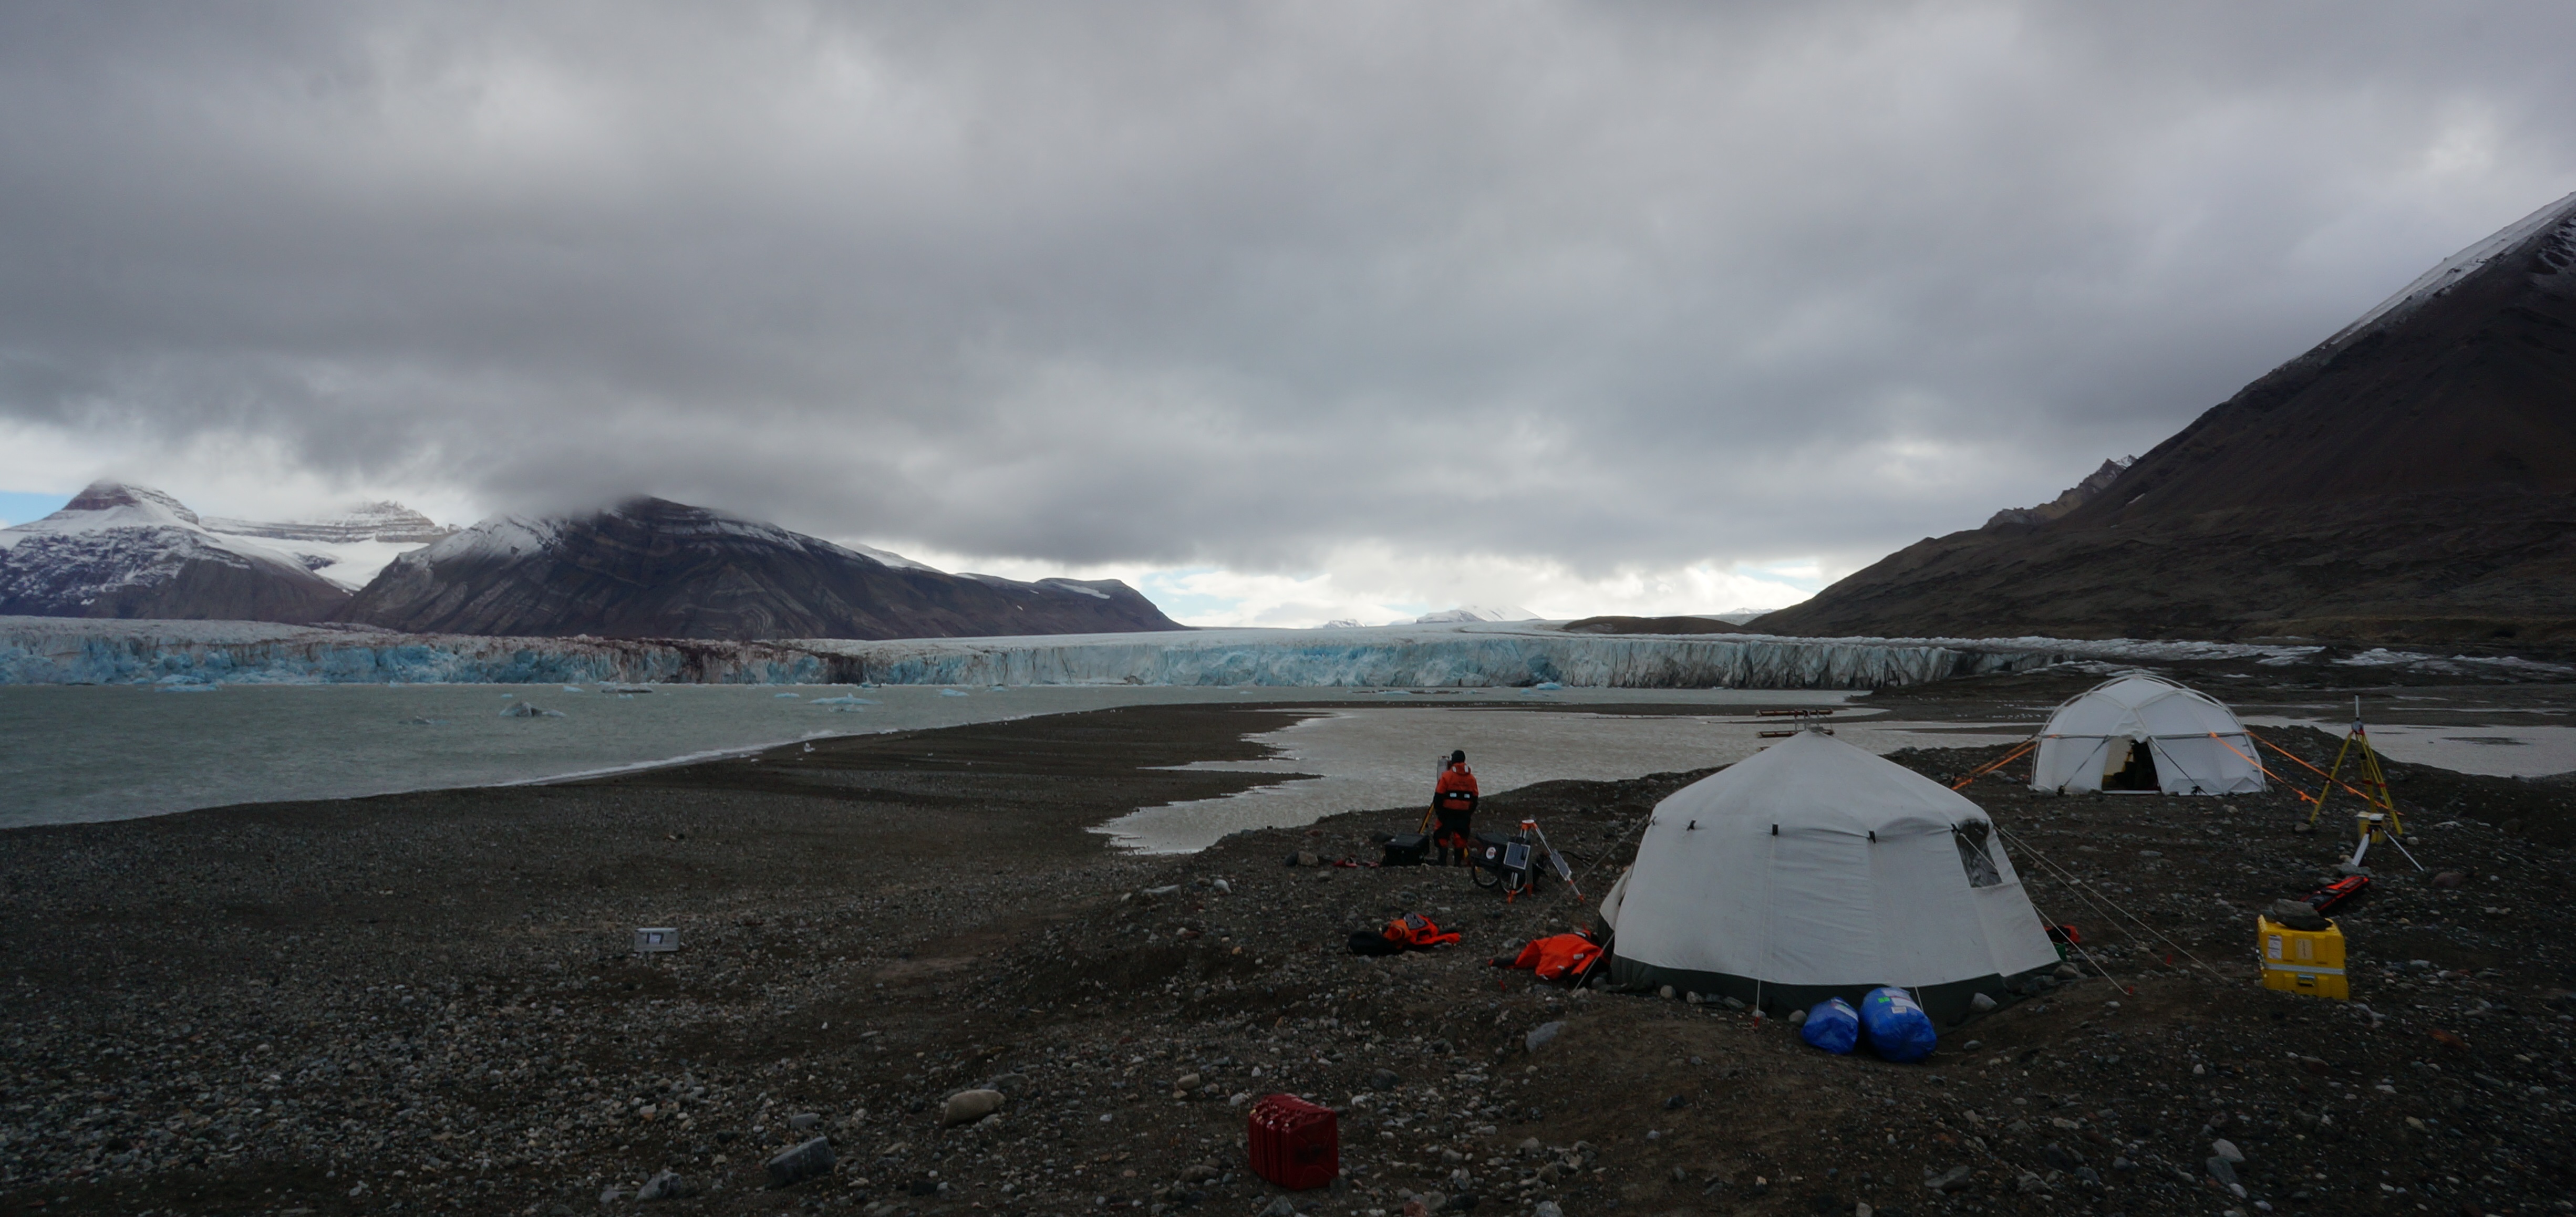 The CalvingSEIS group camp set-up besides Kronebreen glacier. The two tents contain valuable equipment - mainly the radar systems and the lidar system which were being used to scan the calving front of the glacier (August 2016)